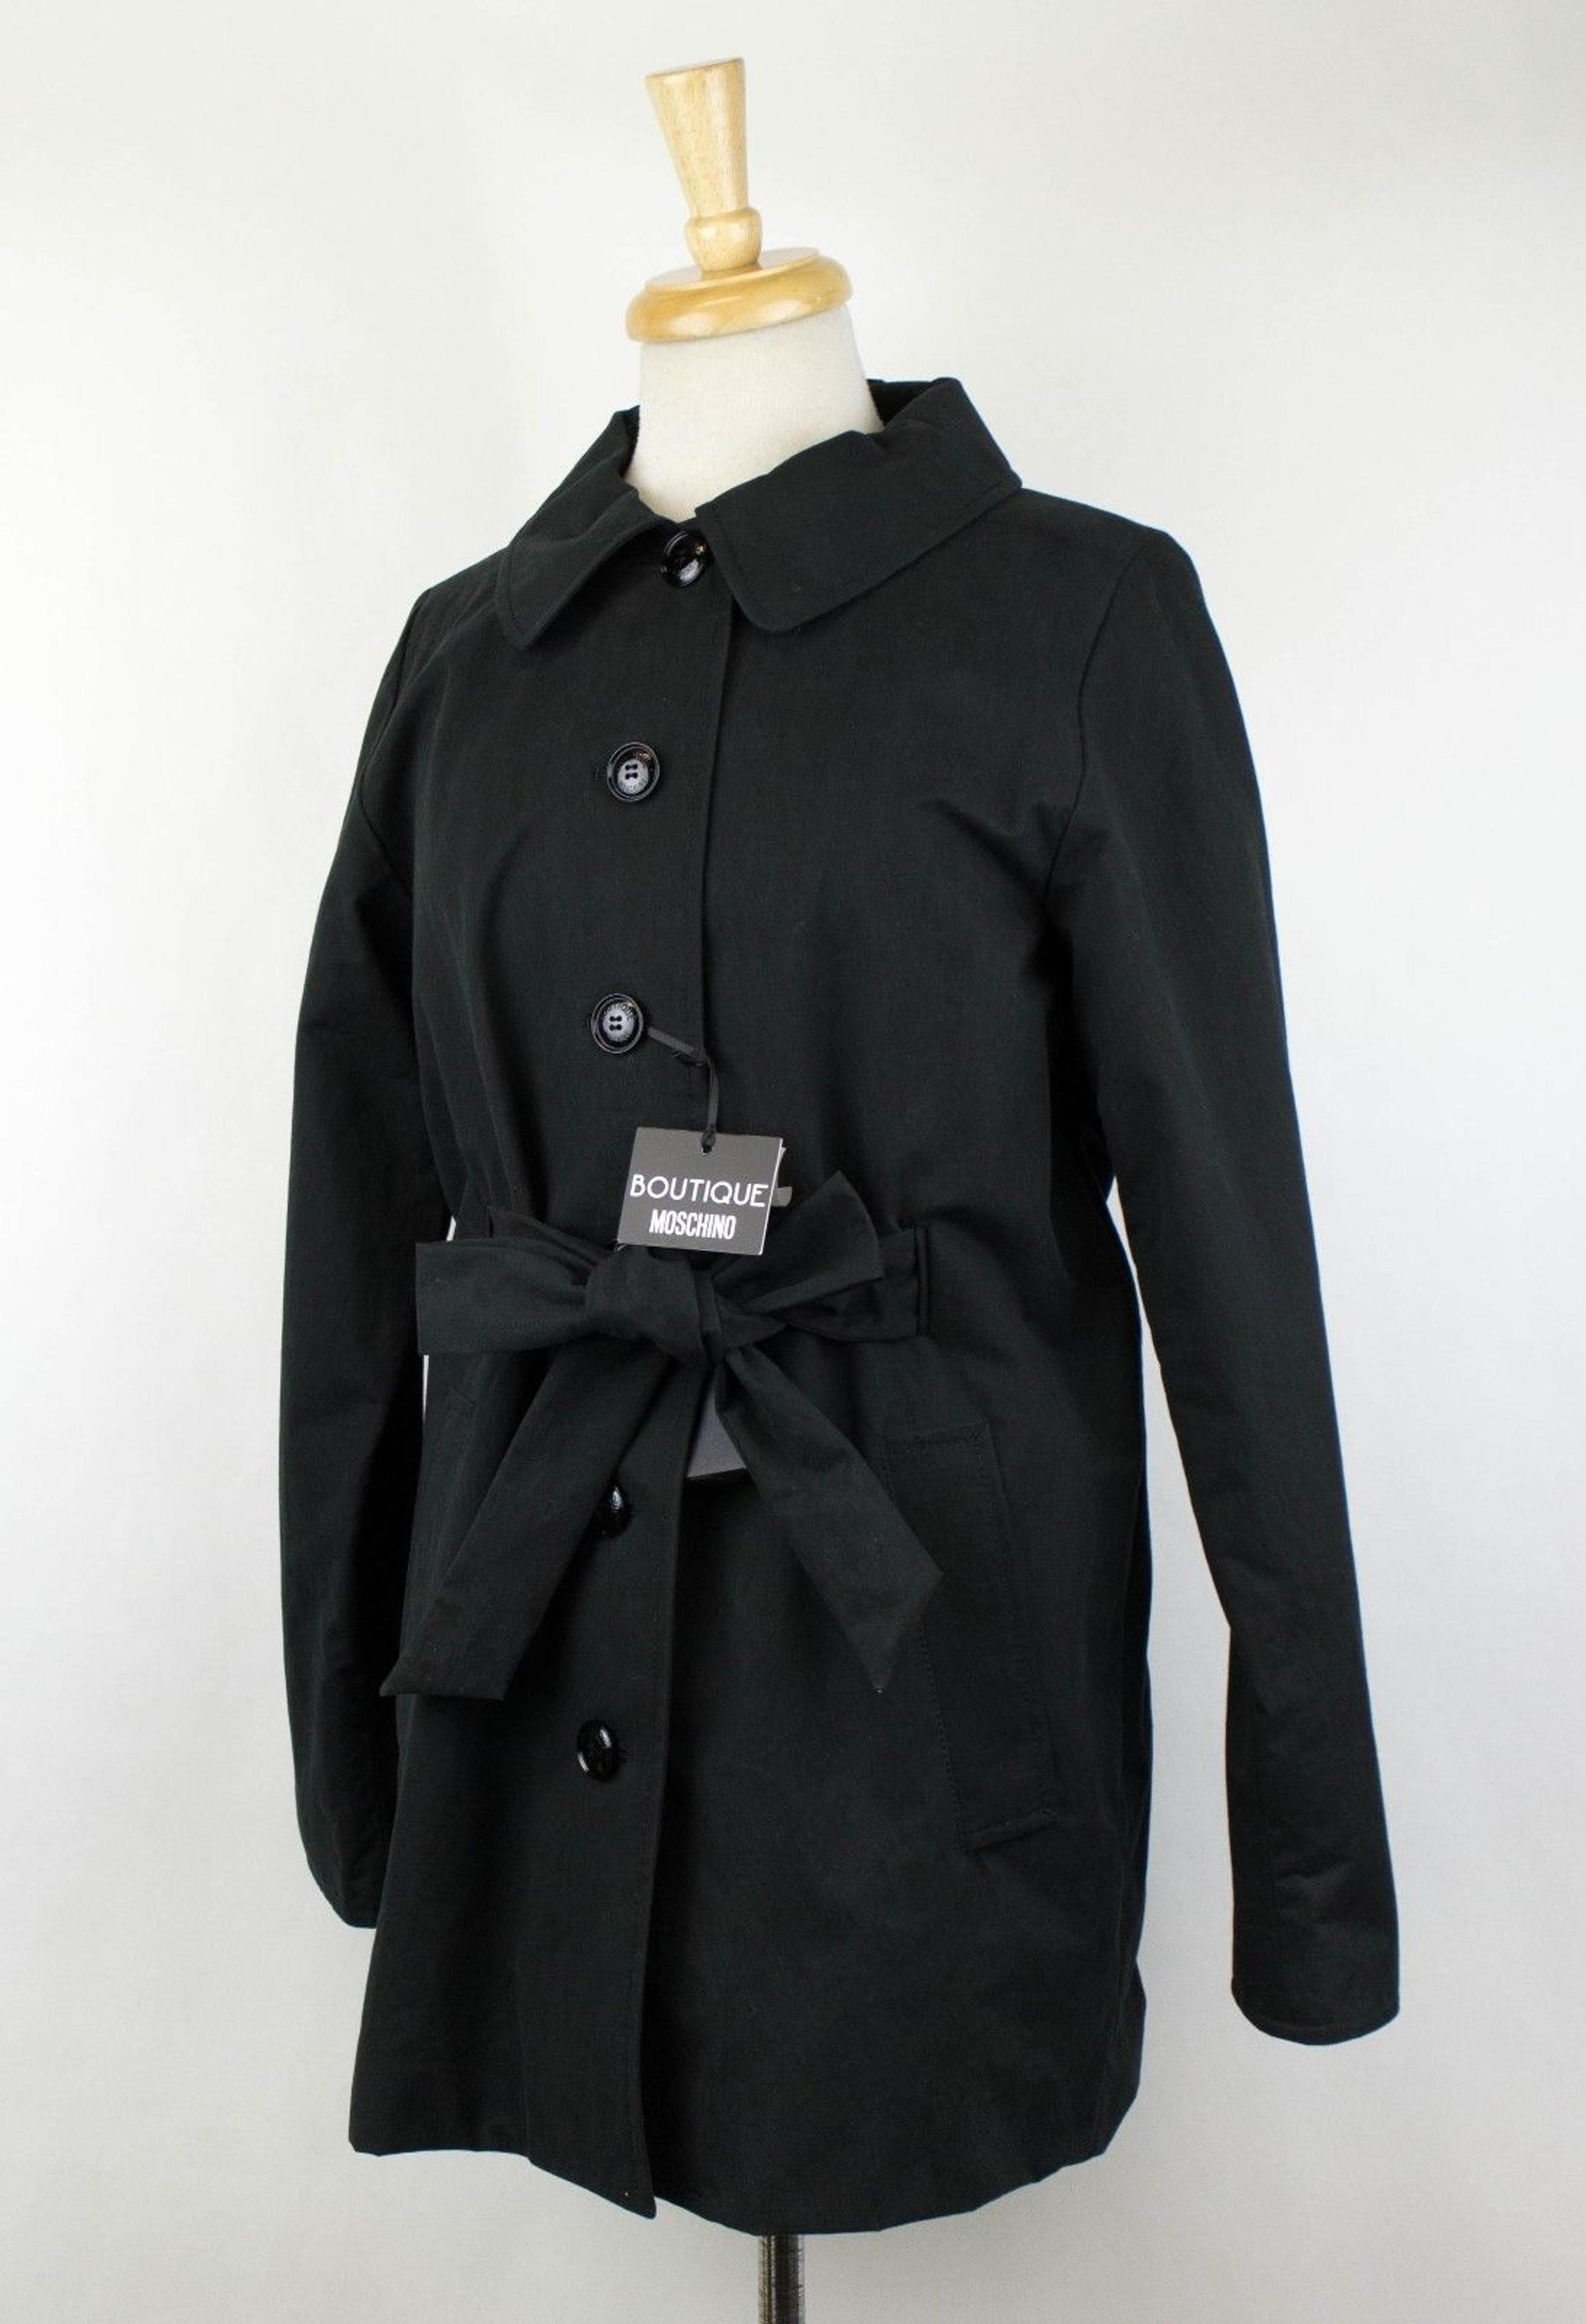 Alternate View 1 of MOSCHINO BOUTIQUE Women's Cuffed 3/4 Sleeve Black Jacket